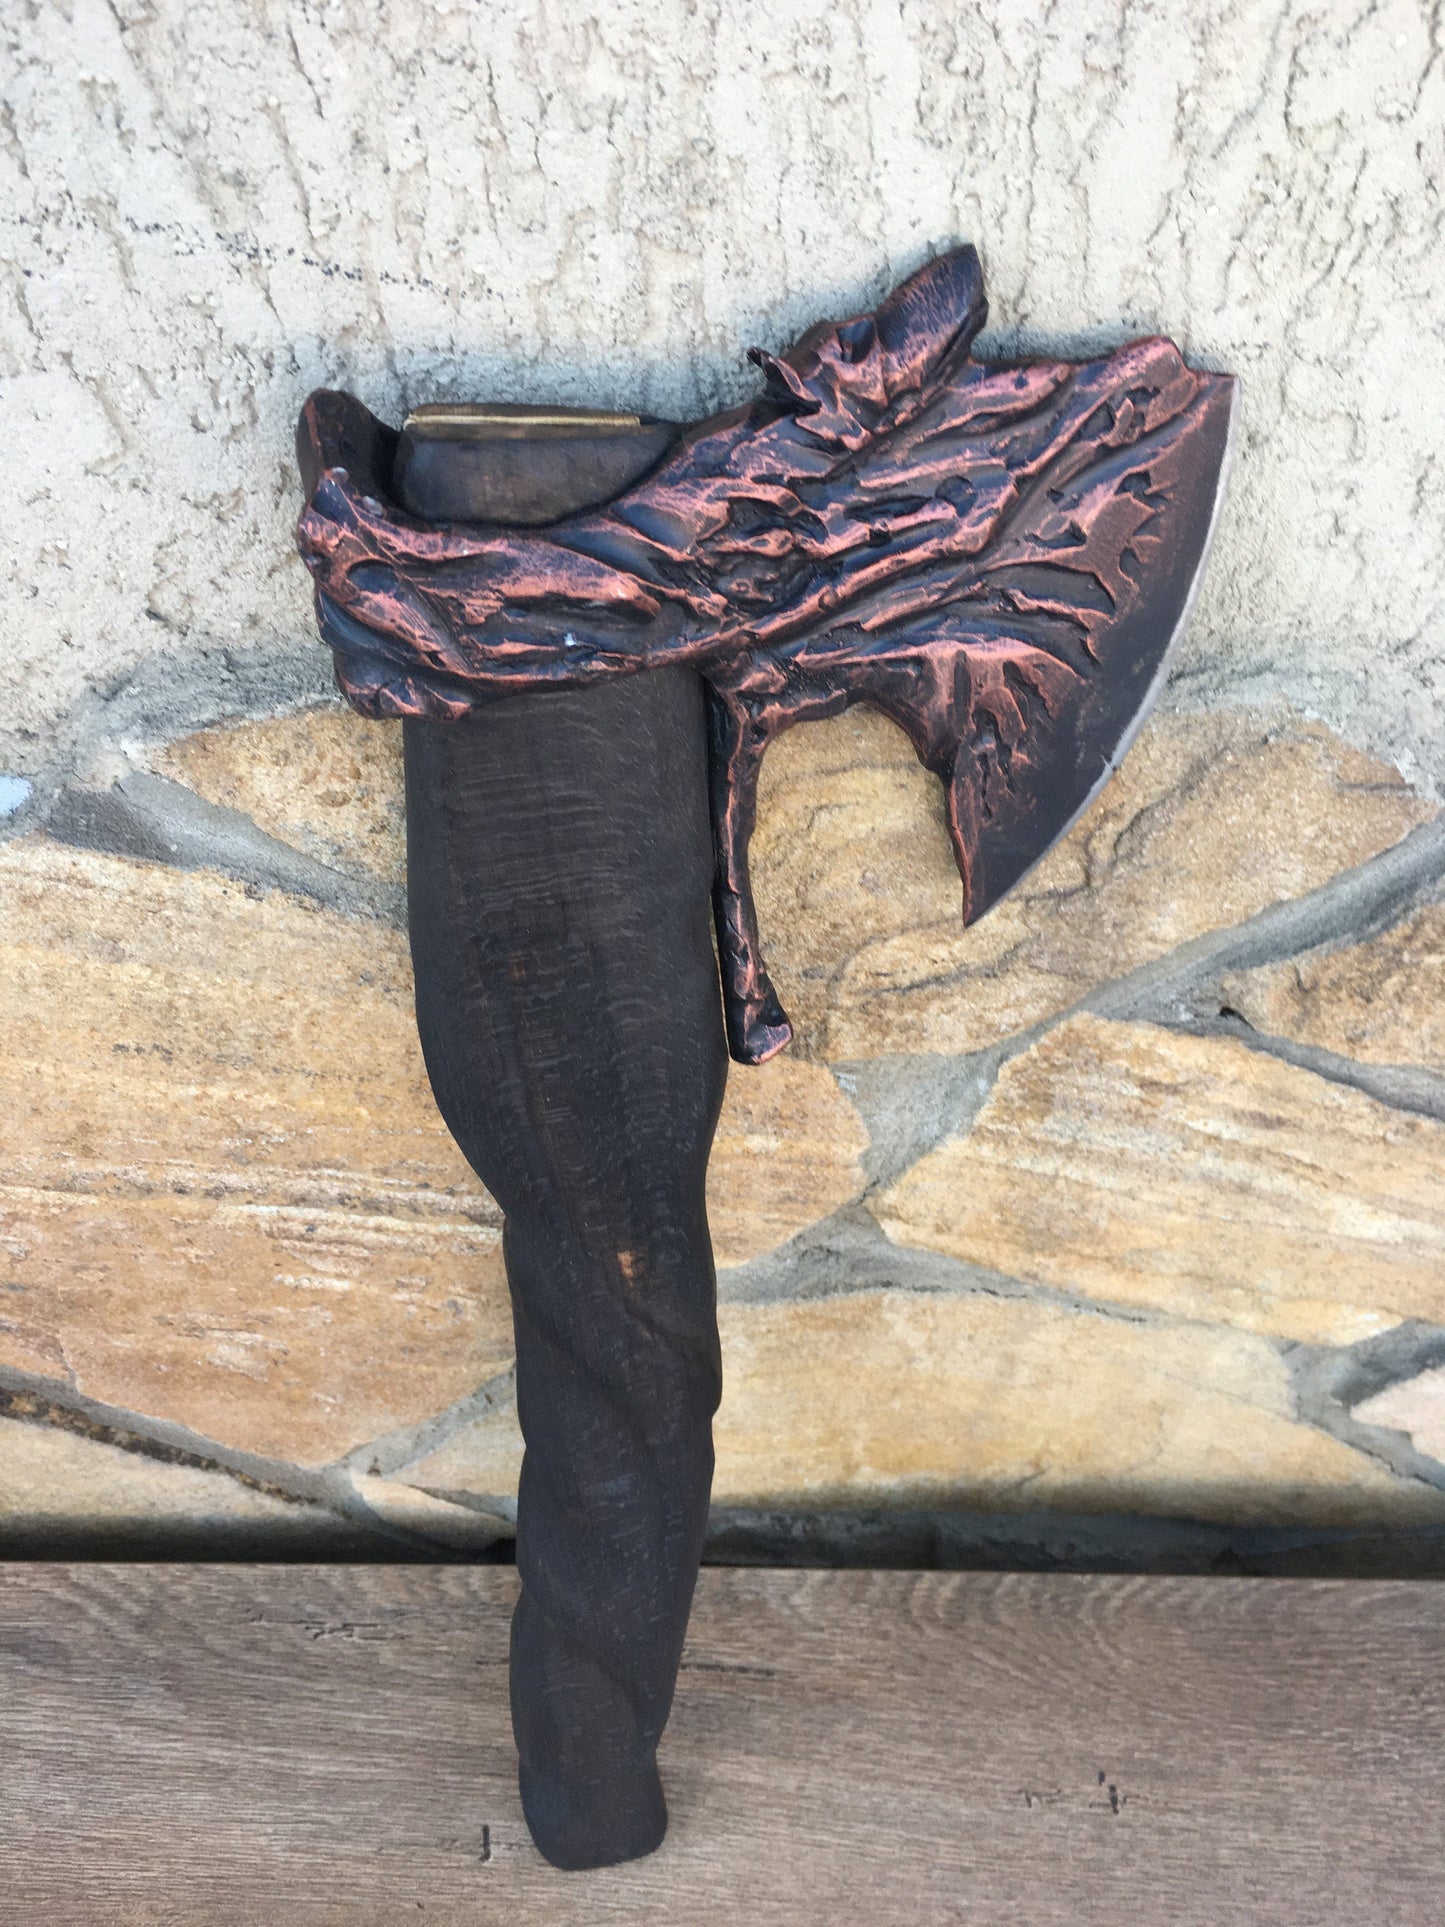 Stress relief, 11th anniversary gift, mens gift, 6th anniversary gift, groomsmen gifts, viking axe, hatchet, christmas gift, wolf gifts, axe